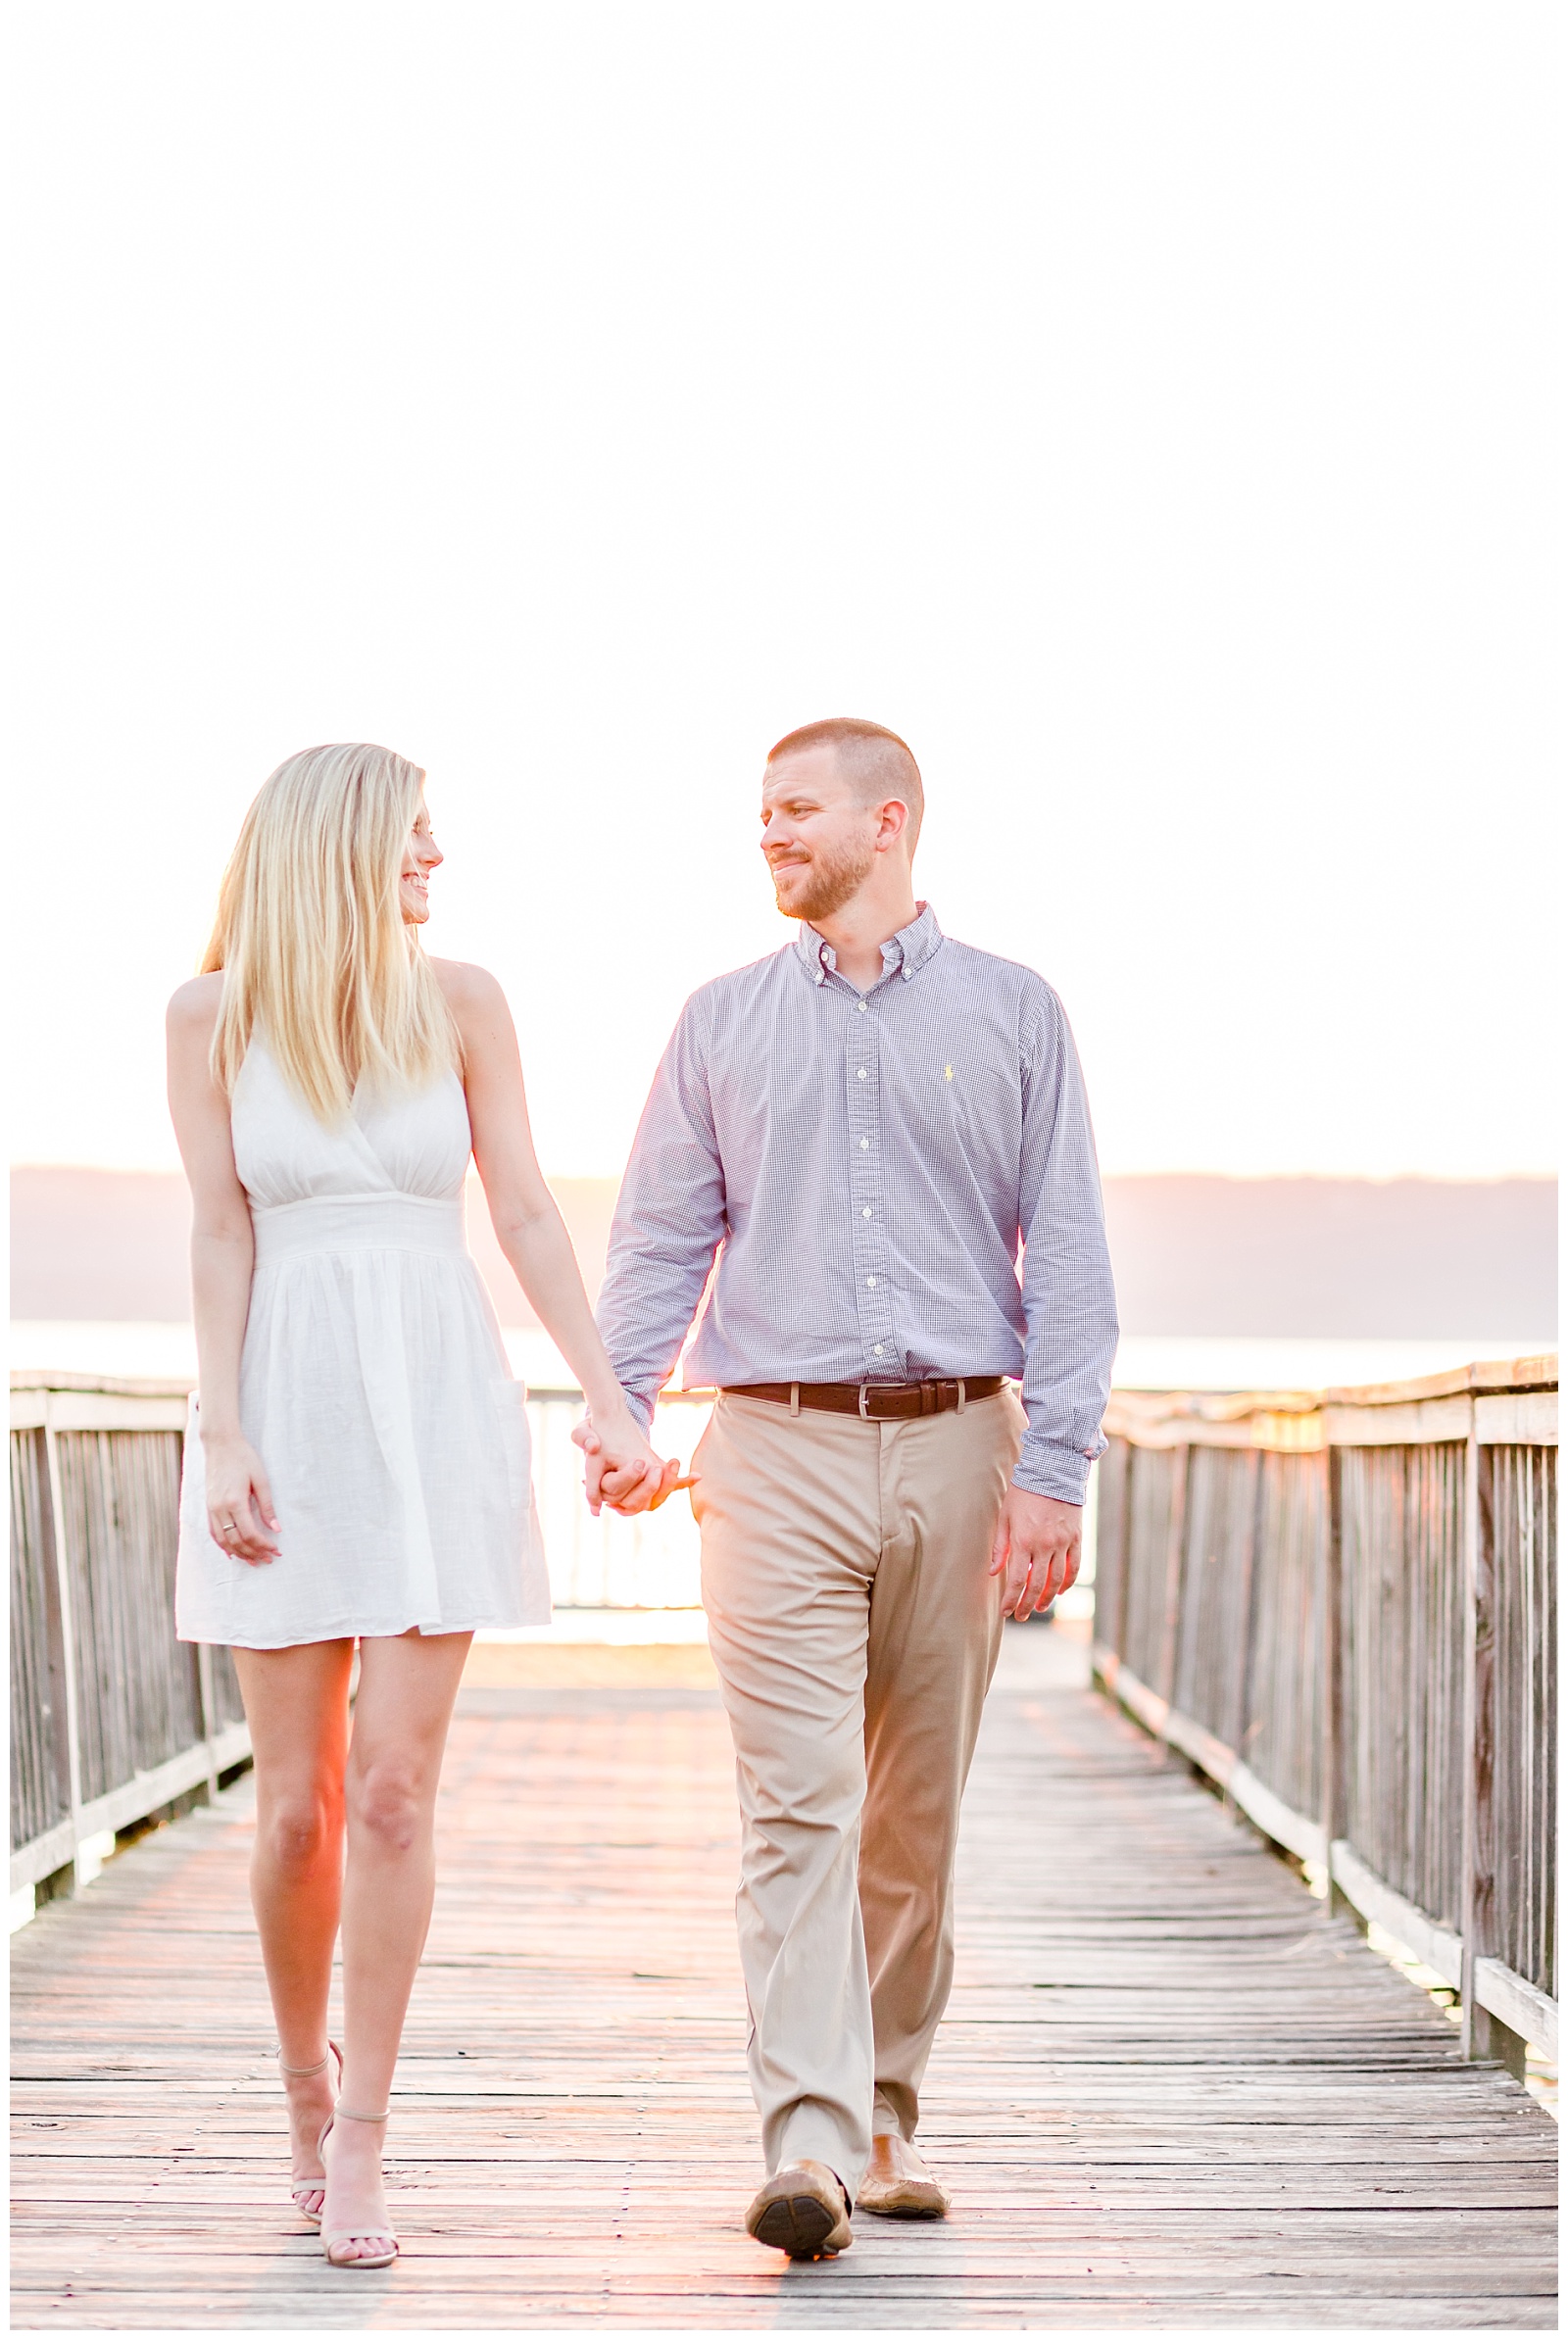 Lake engagement picture on dock at sunset